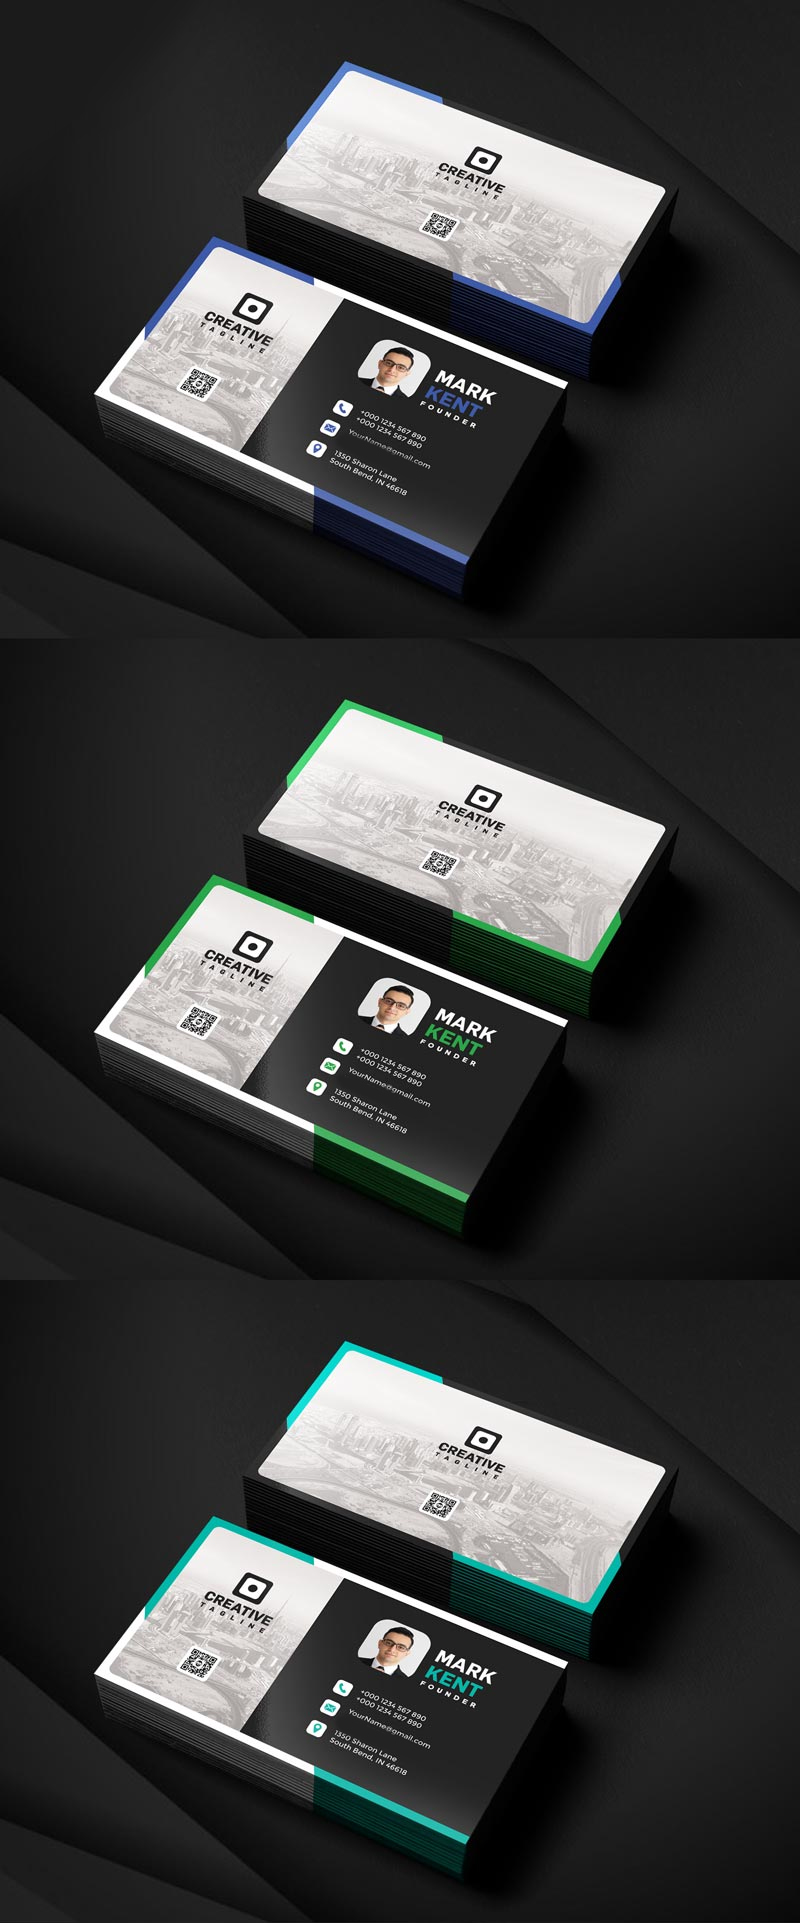 Free Download Stylish Business Card PSD Template in (4 colors)